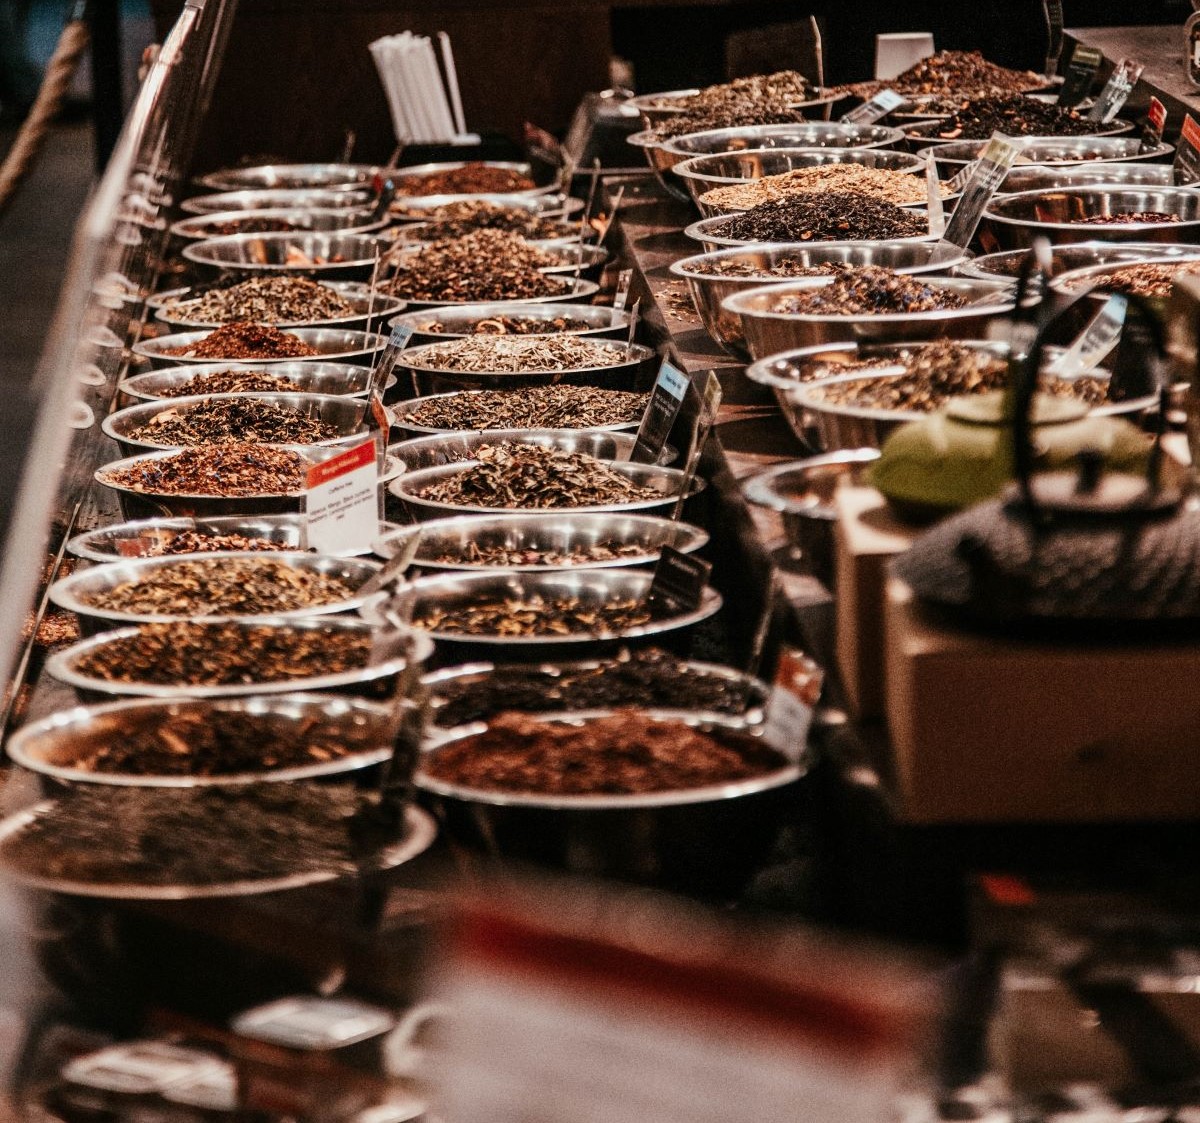 market stand with different spices in silver bowls